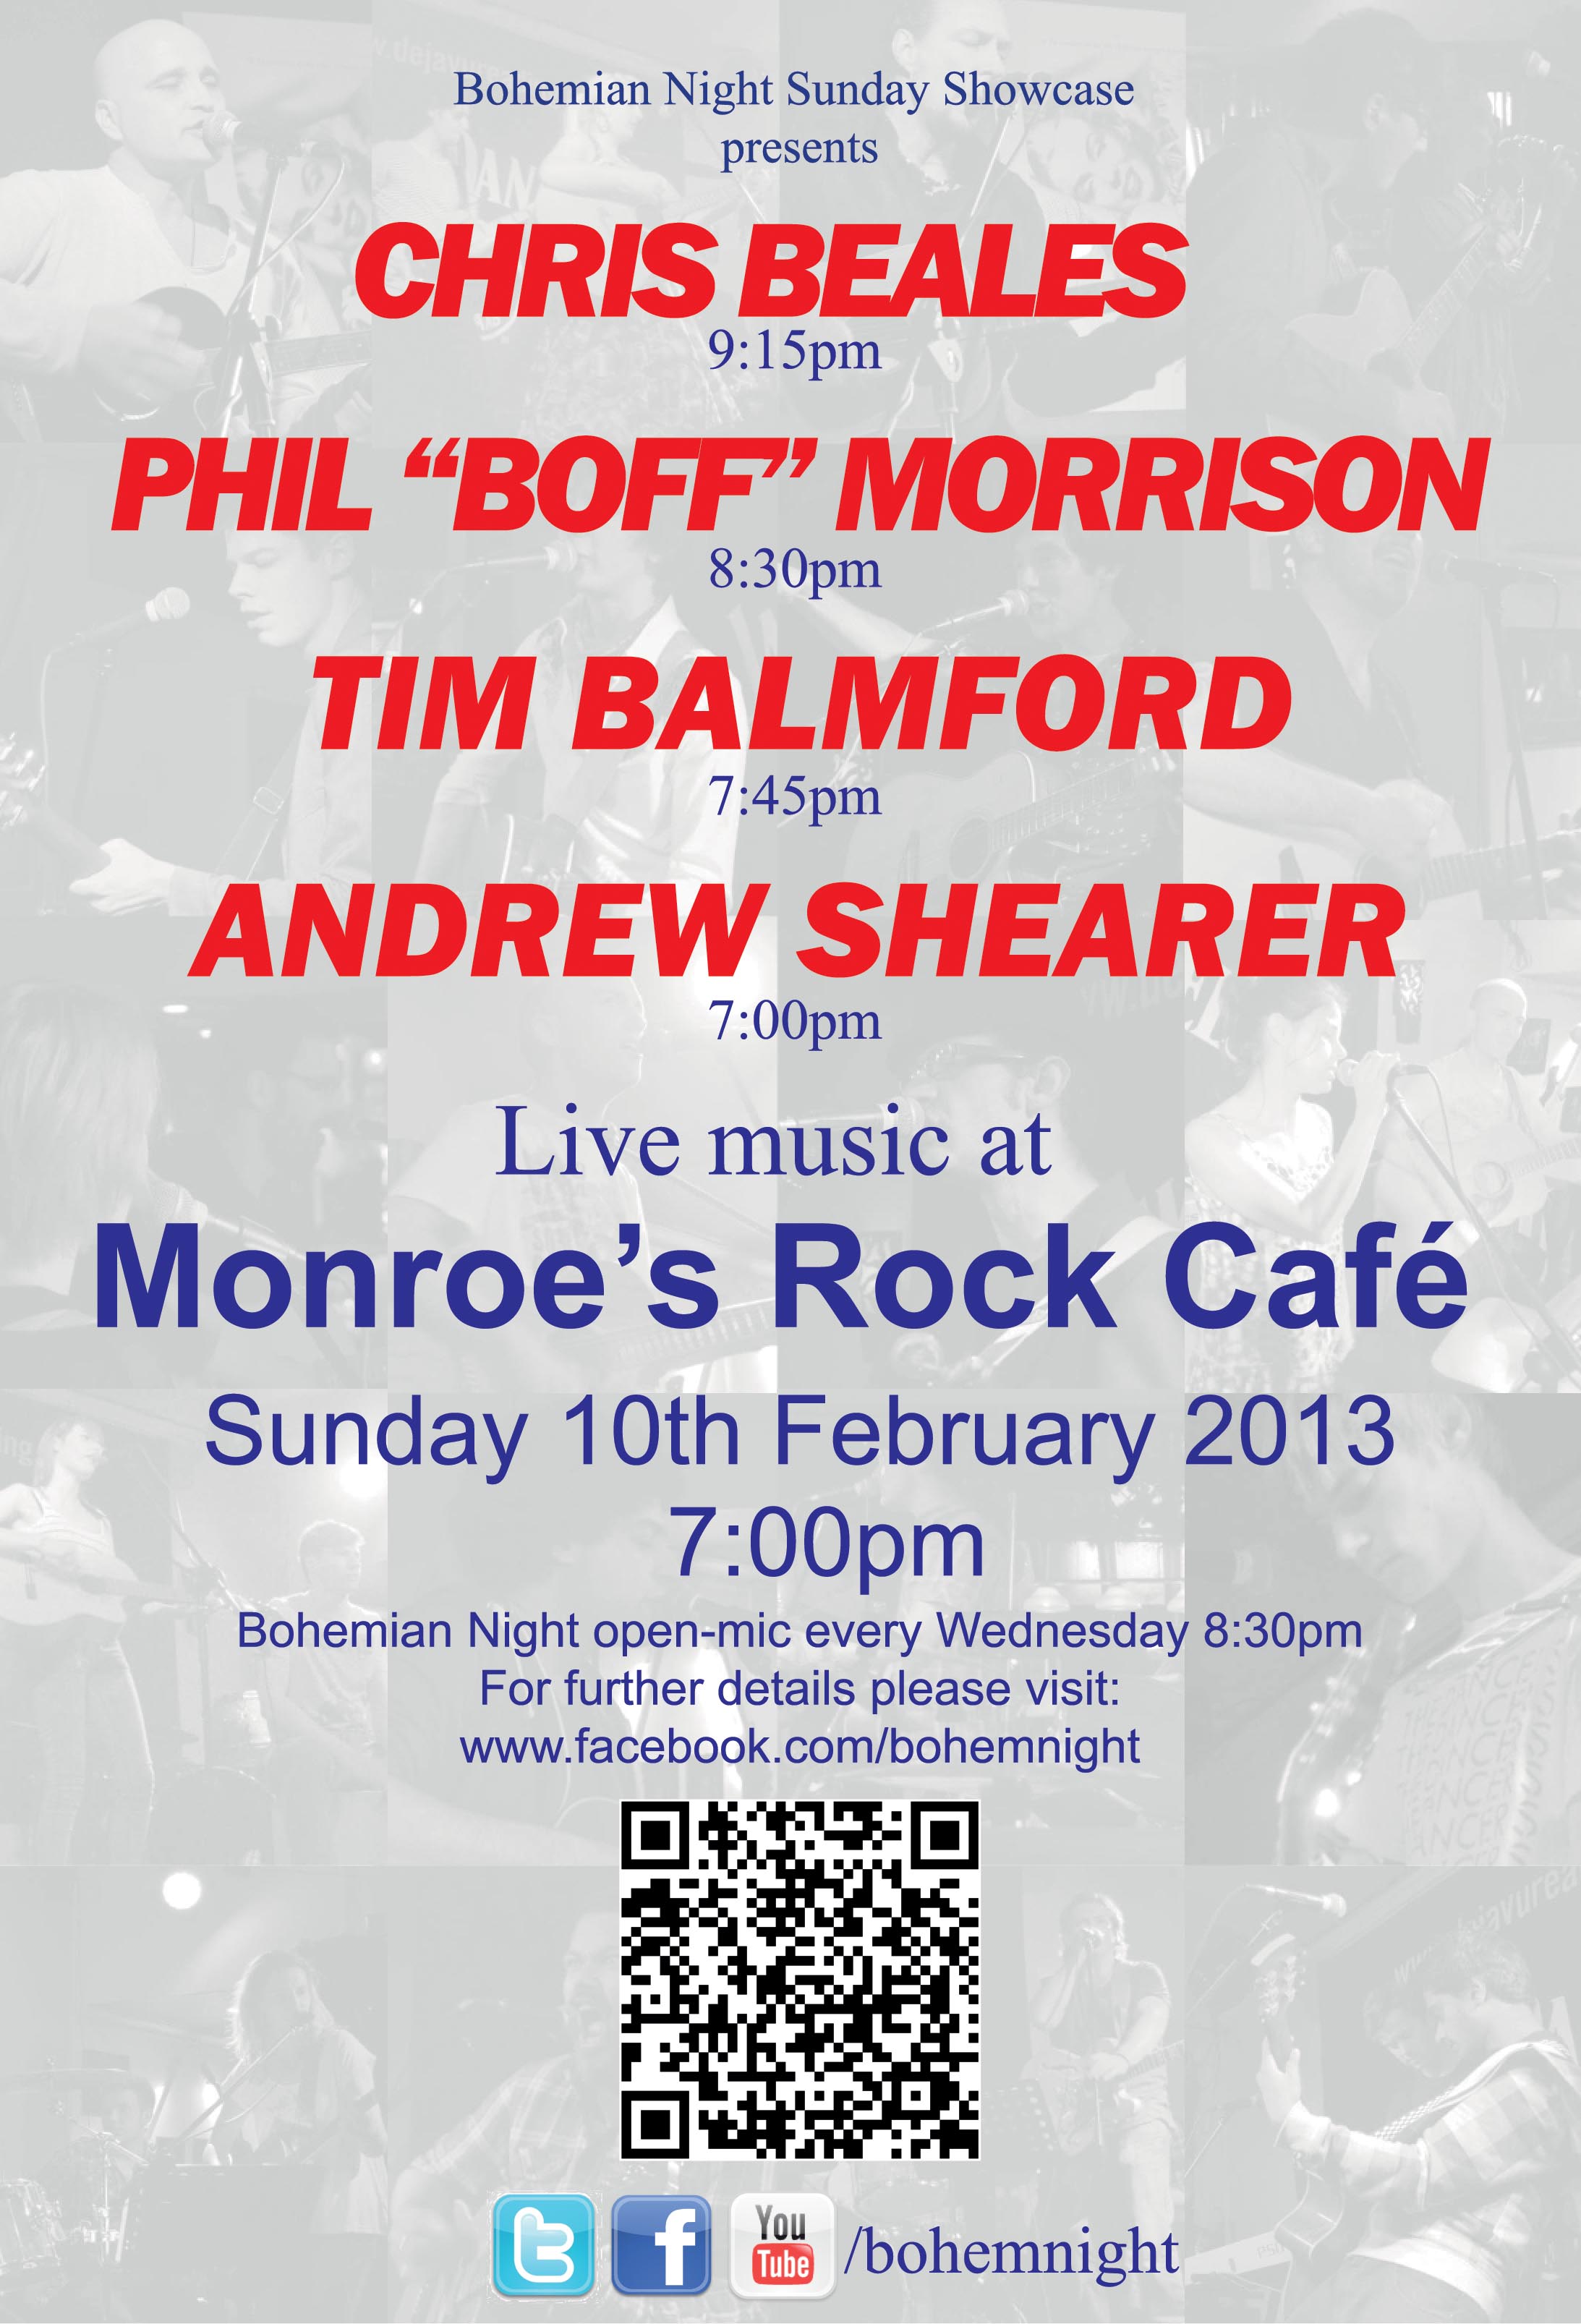 Poster for gig on 10th February 2013